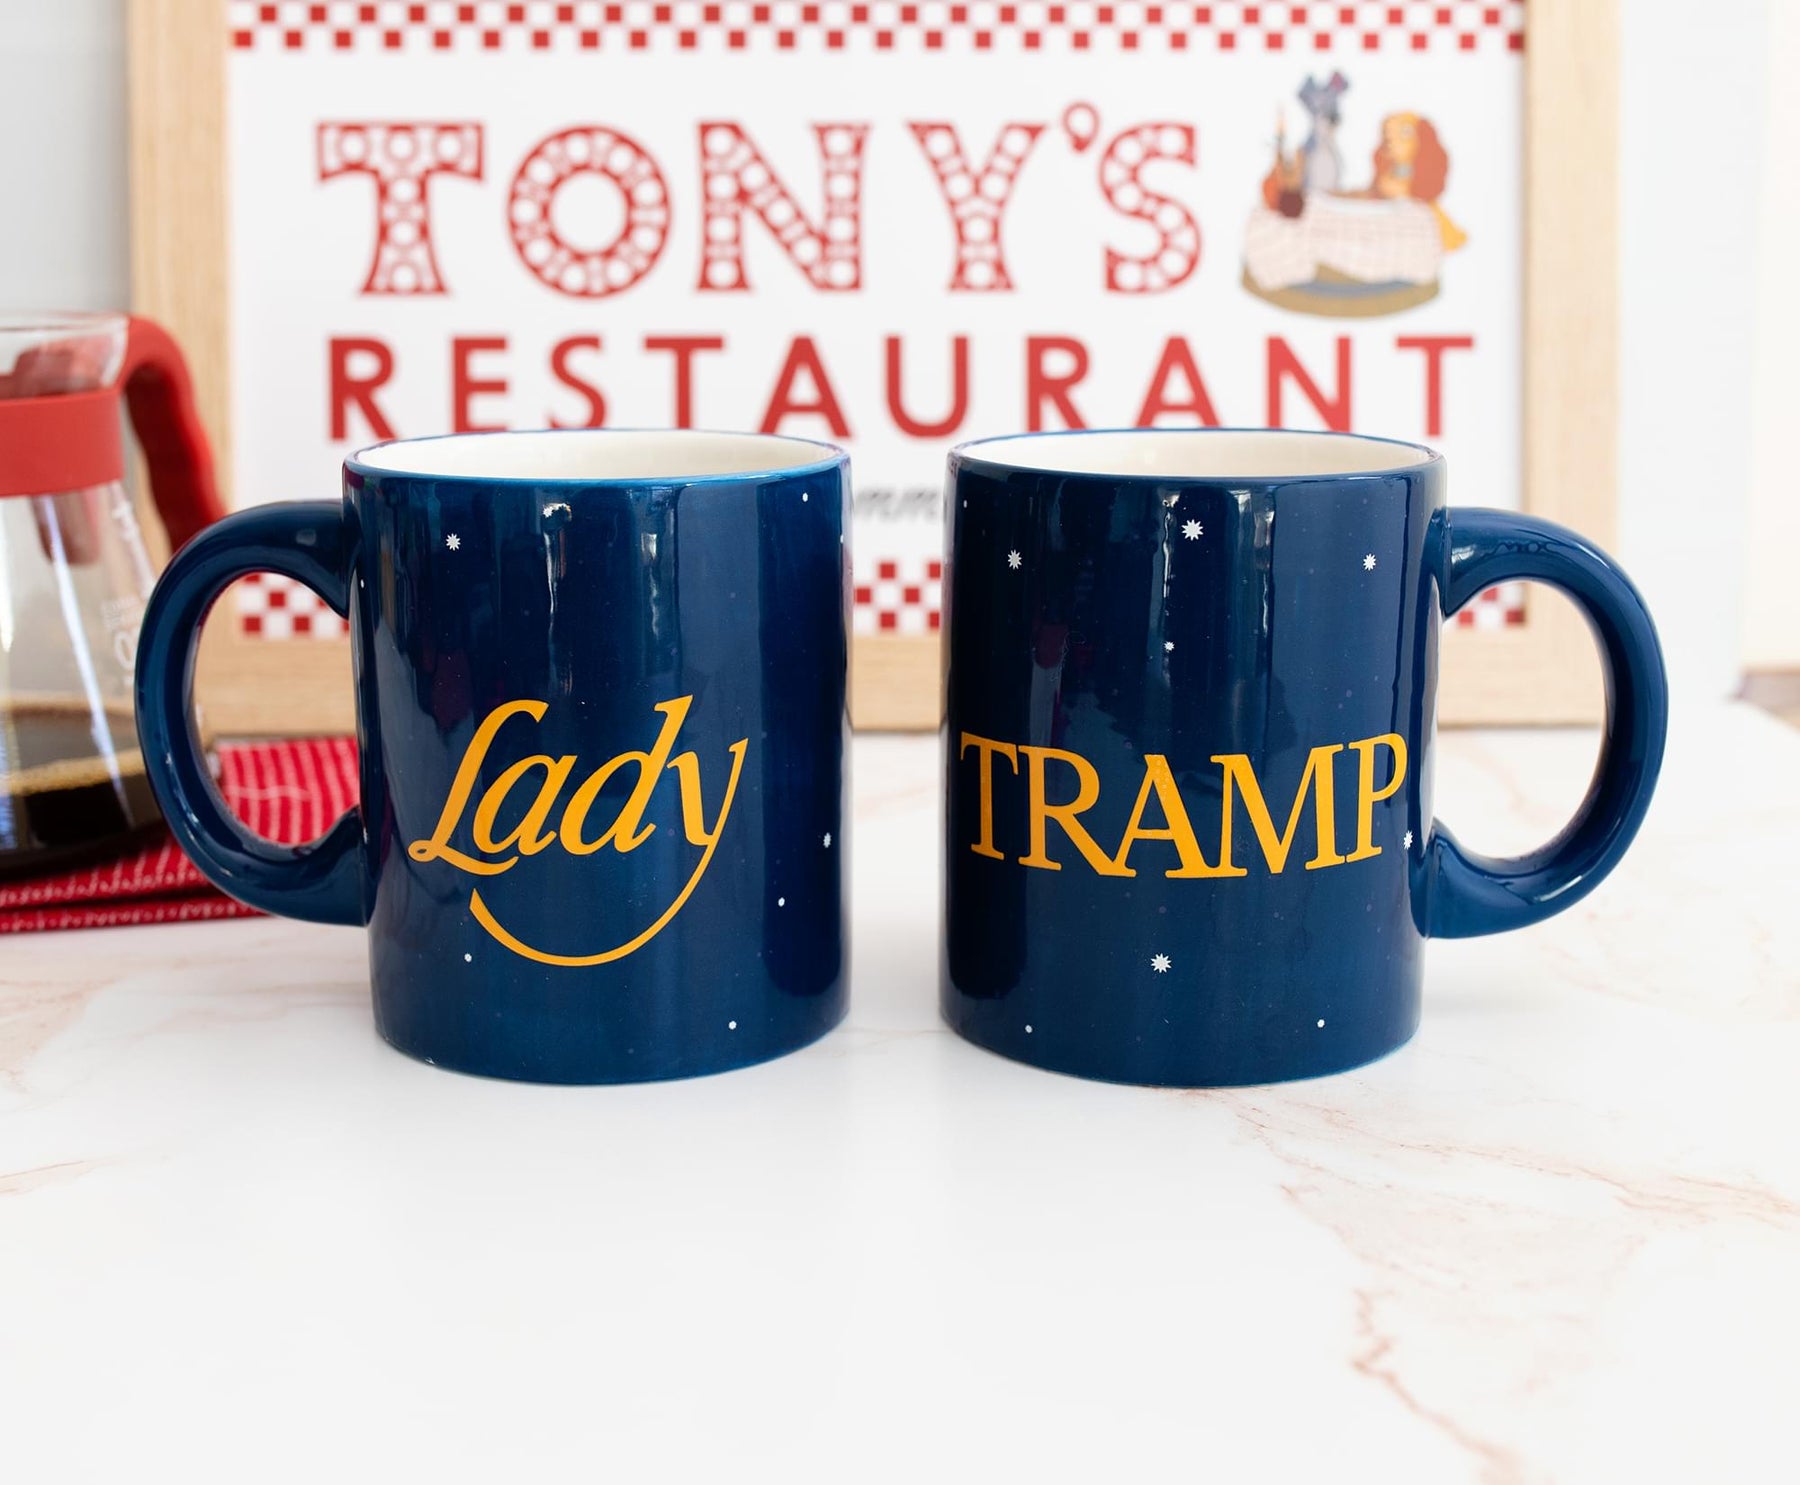 Disney Lady and the Tramp Starry Sky 20-Ounce Ceramic Mugs | Set of 2